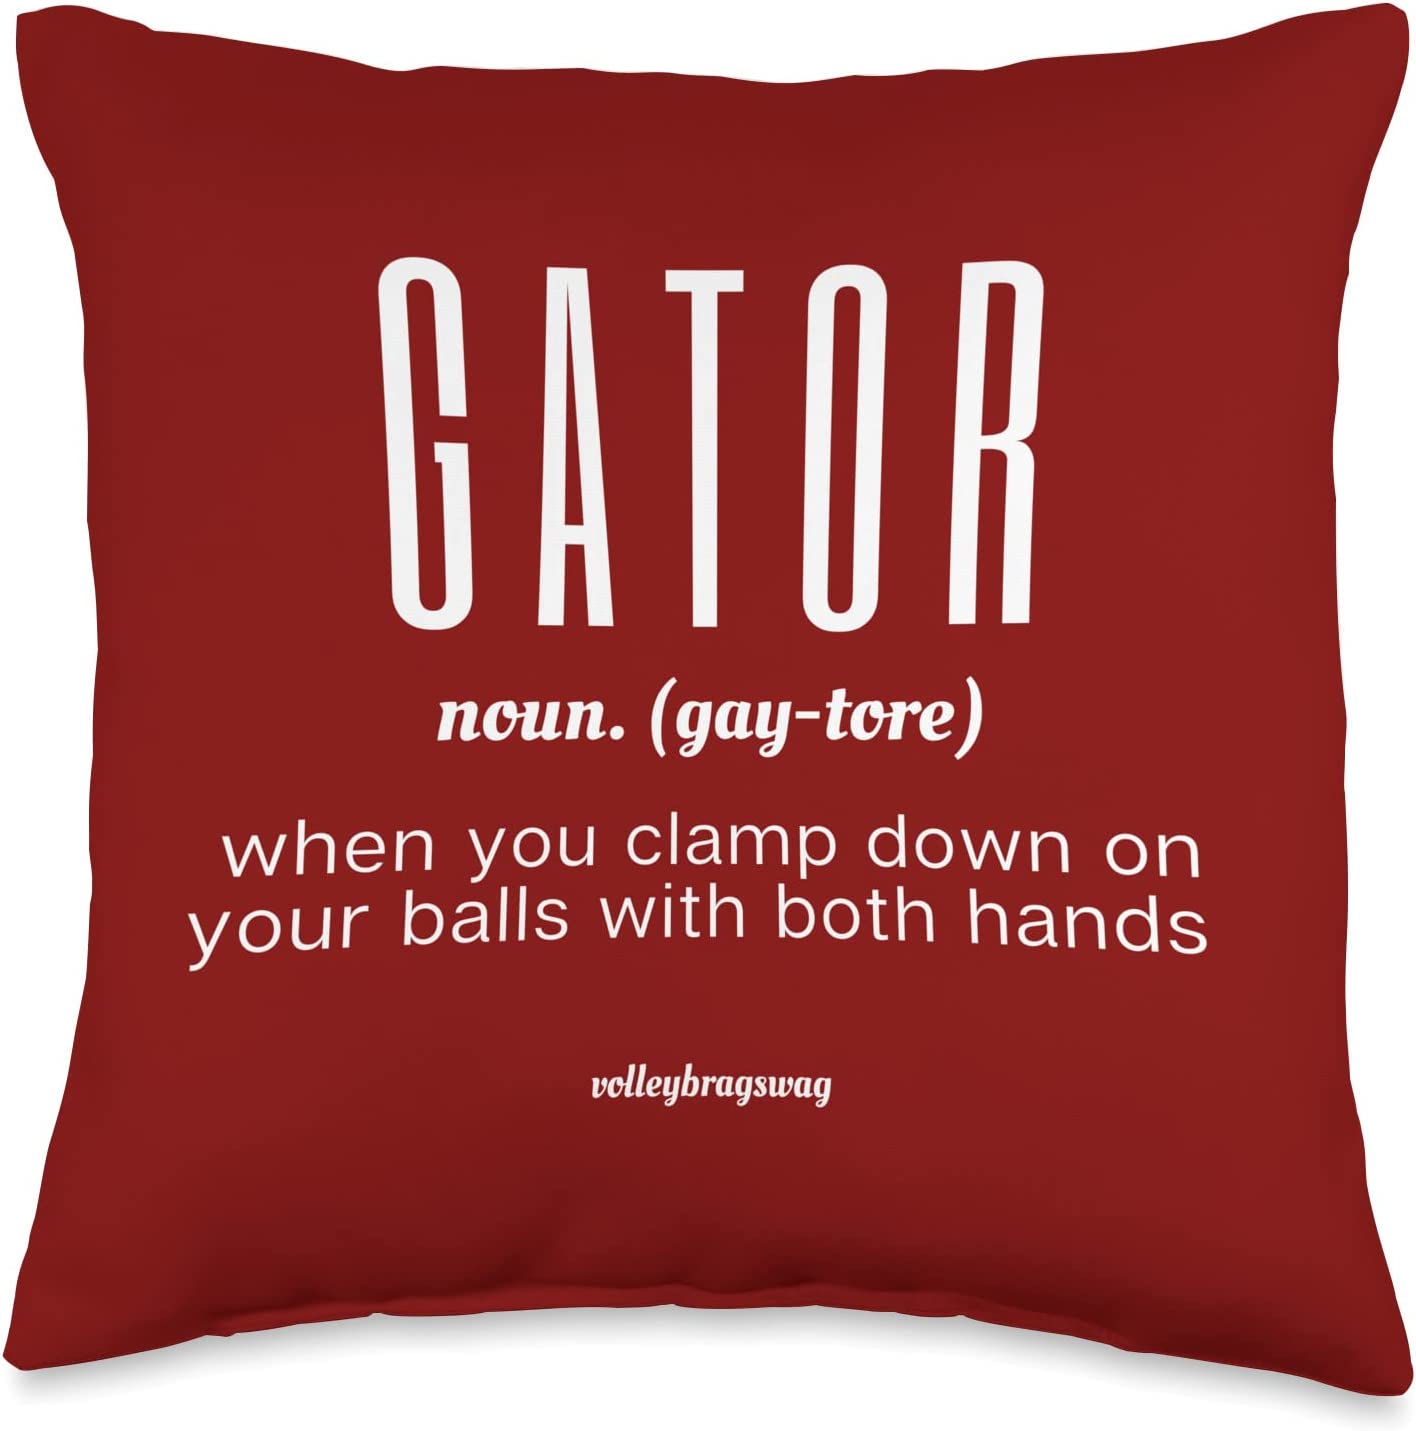 GATOR (noun) When You Clamp Down On Your Balls With Both Hands volleyball shirt. April Chapple, Launches a Hilarious Volleyball T-shirt Line With Fun Tongue-in-Cheek Designs sure to make players and enthusiasts laugh.